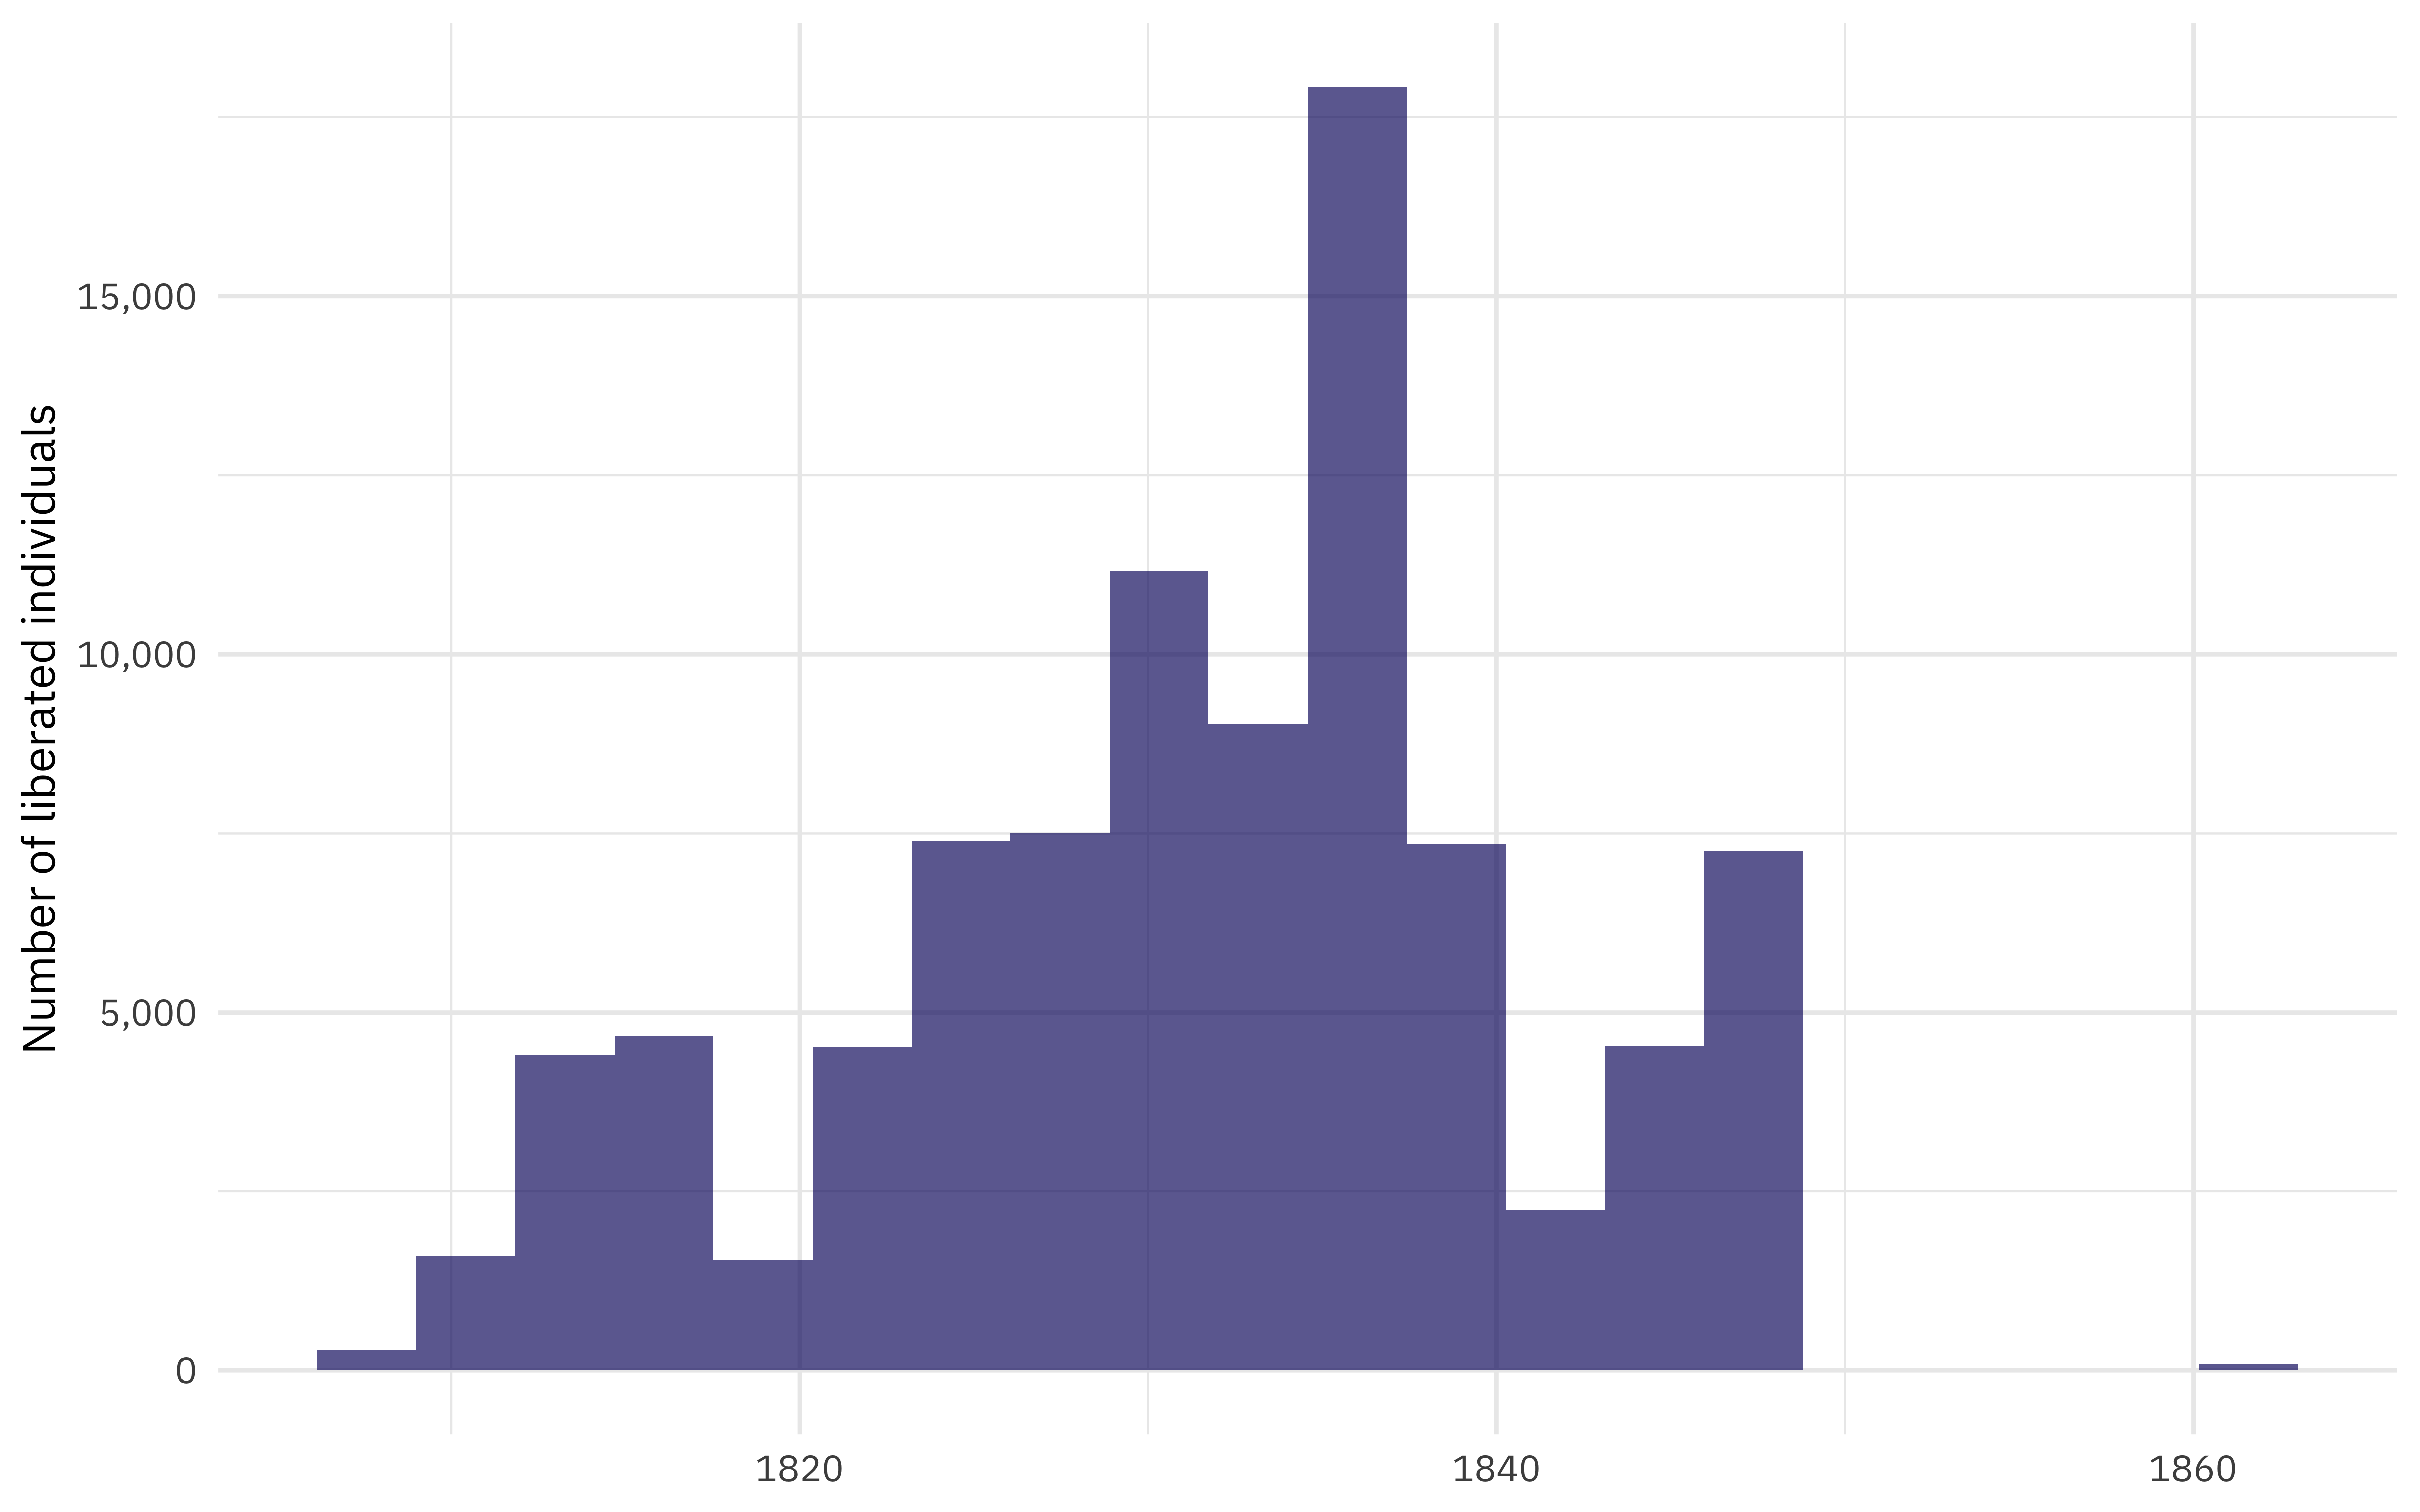 A ggplot histogram of slave liberations, with year on the x axis and 'Number of liberated individuals' on the y axis